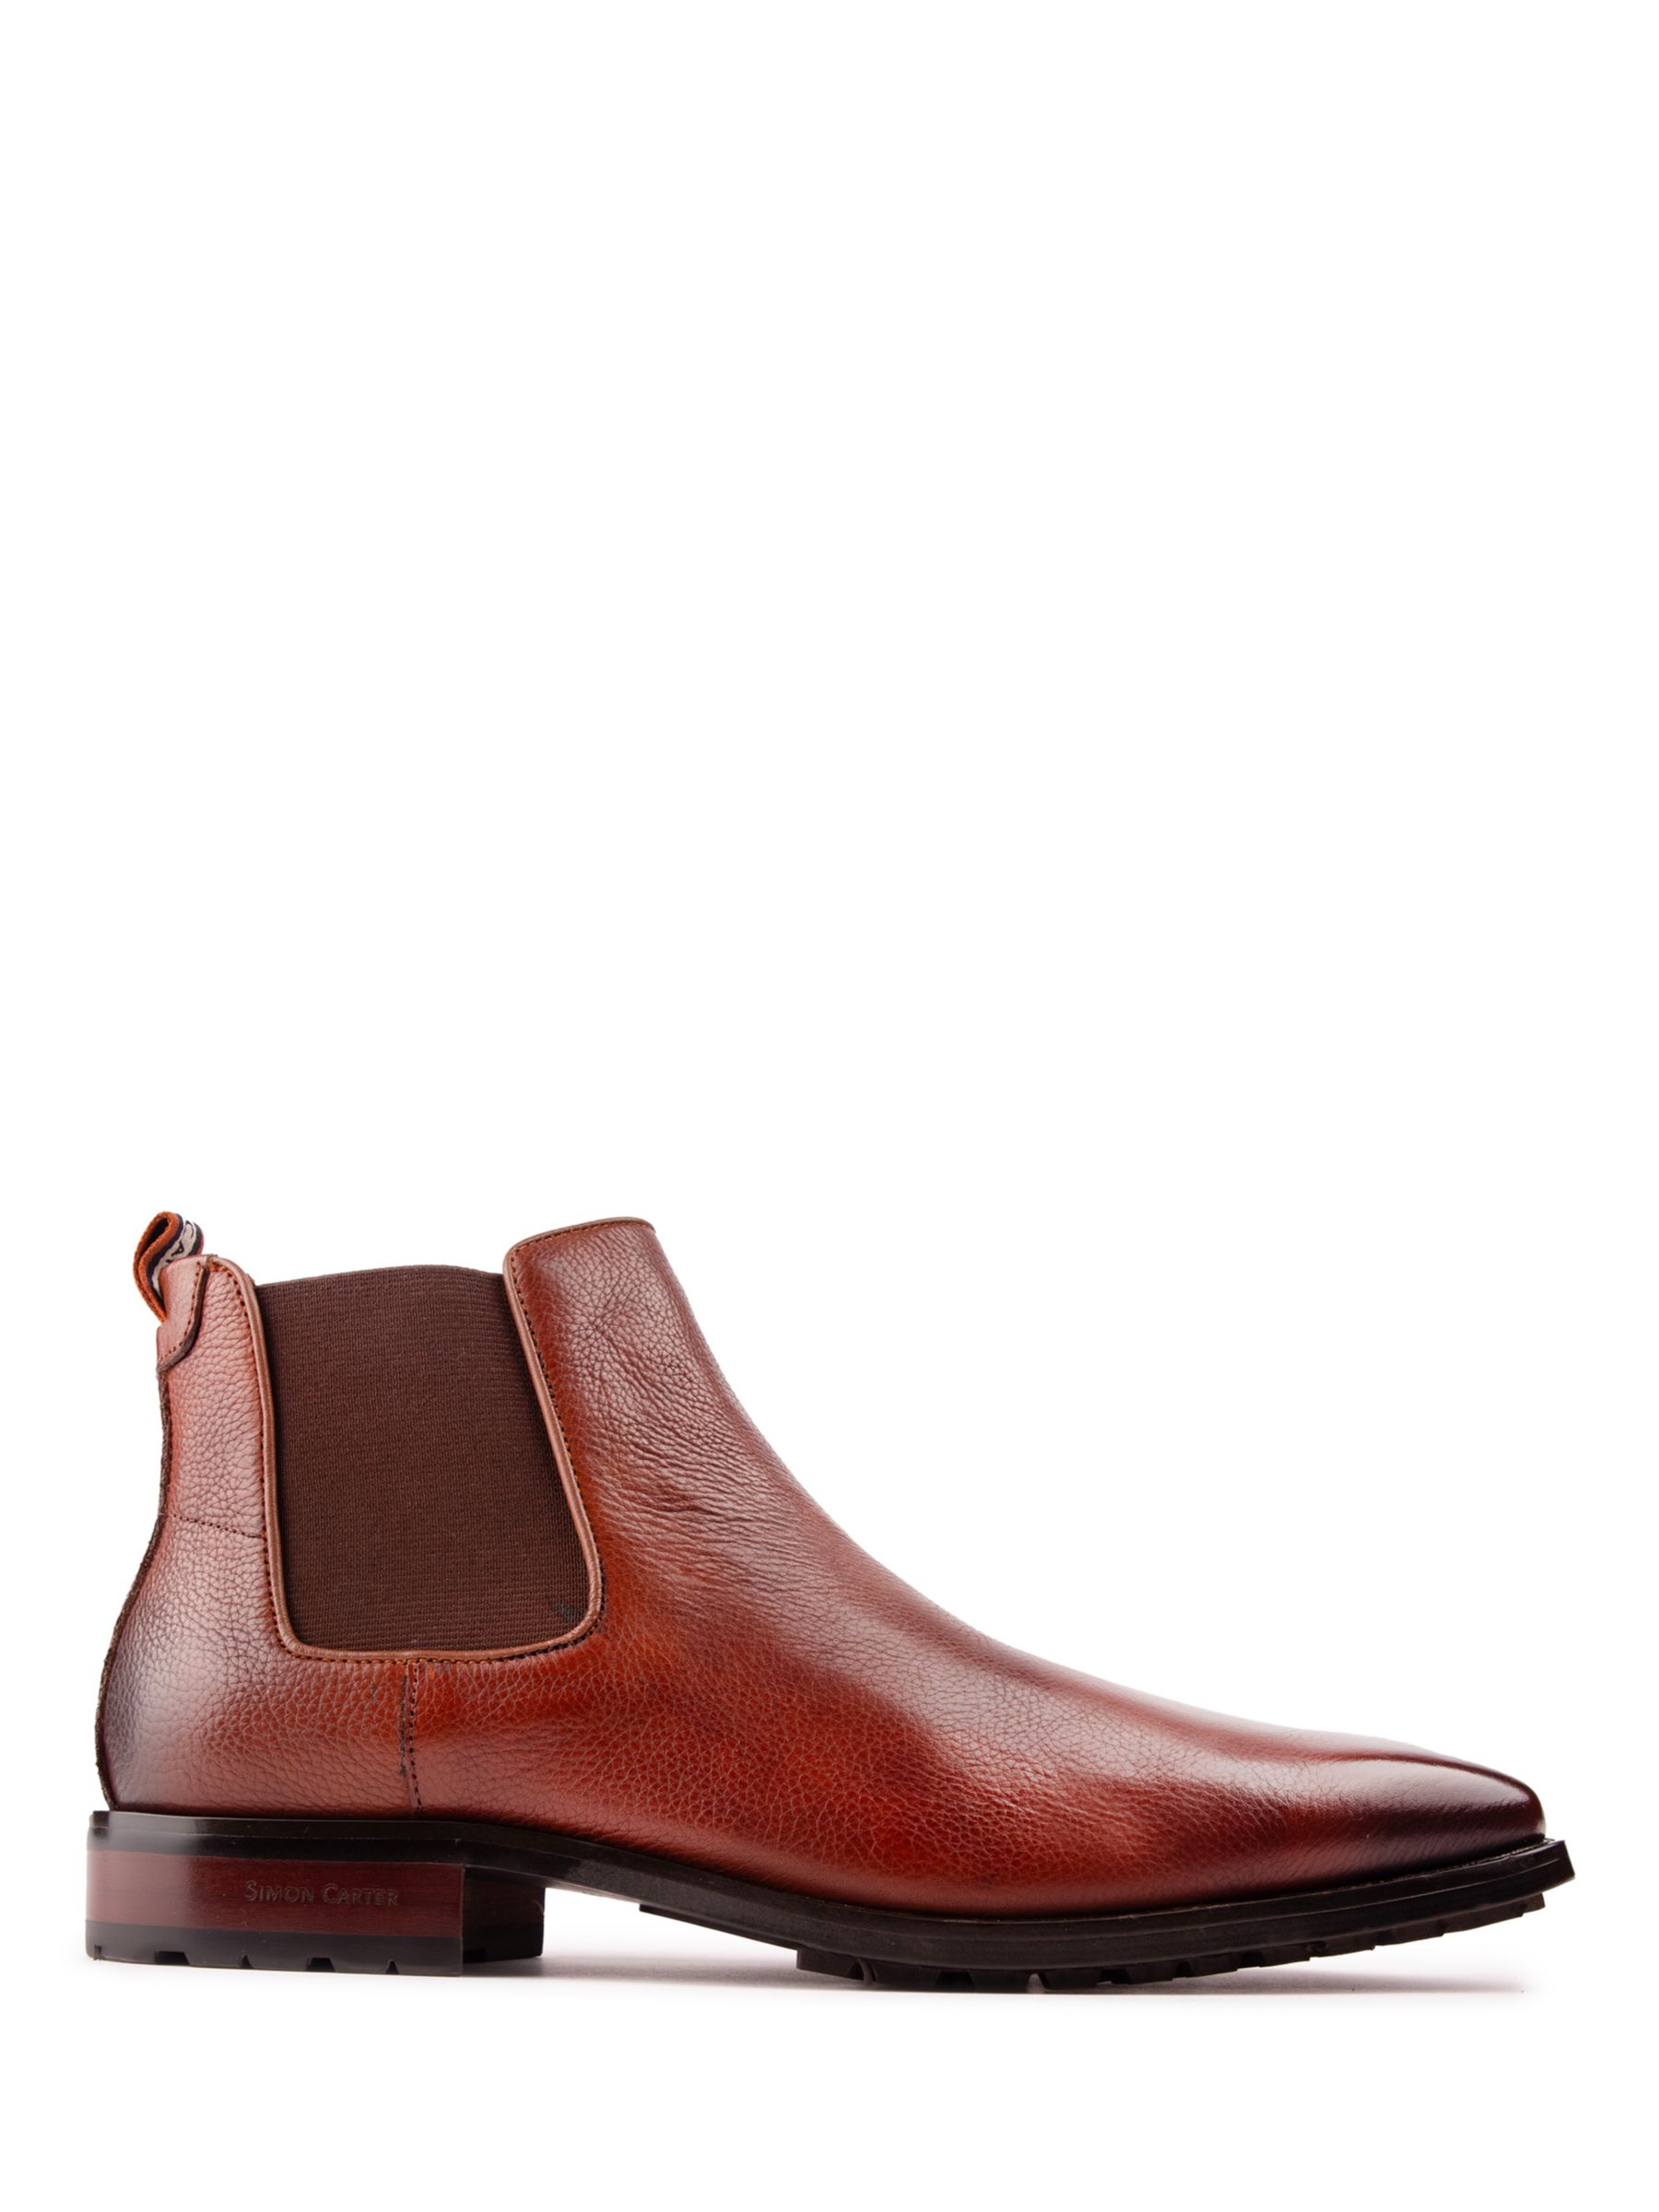 Simon Carter Clover Leather Chelsea Boots, Tan at John Lewis & Partners